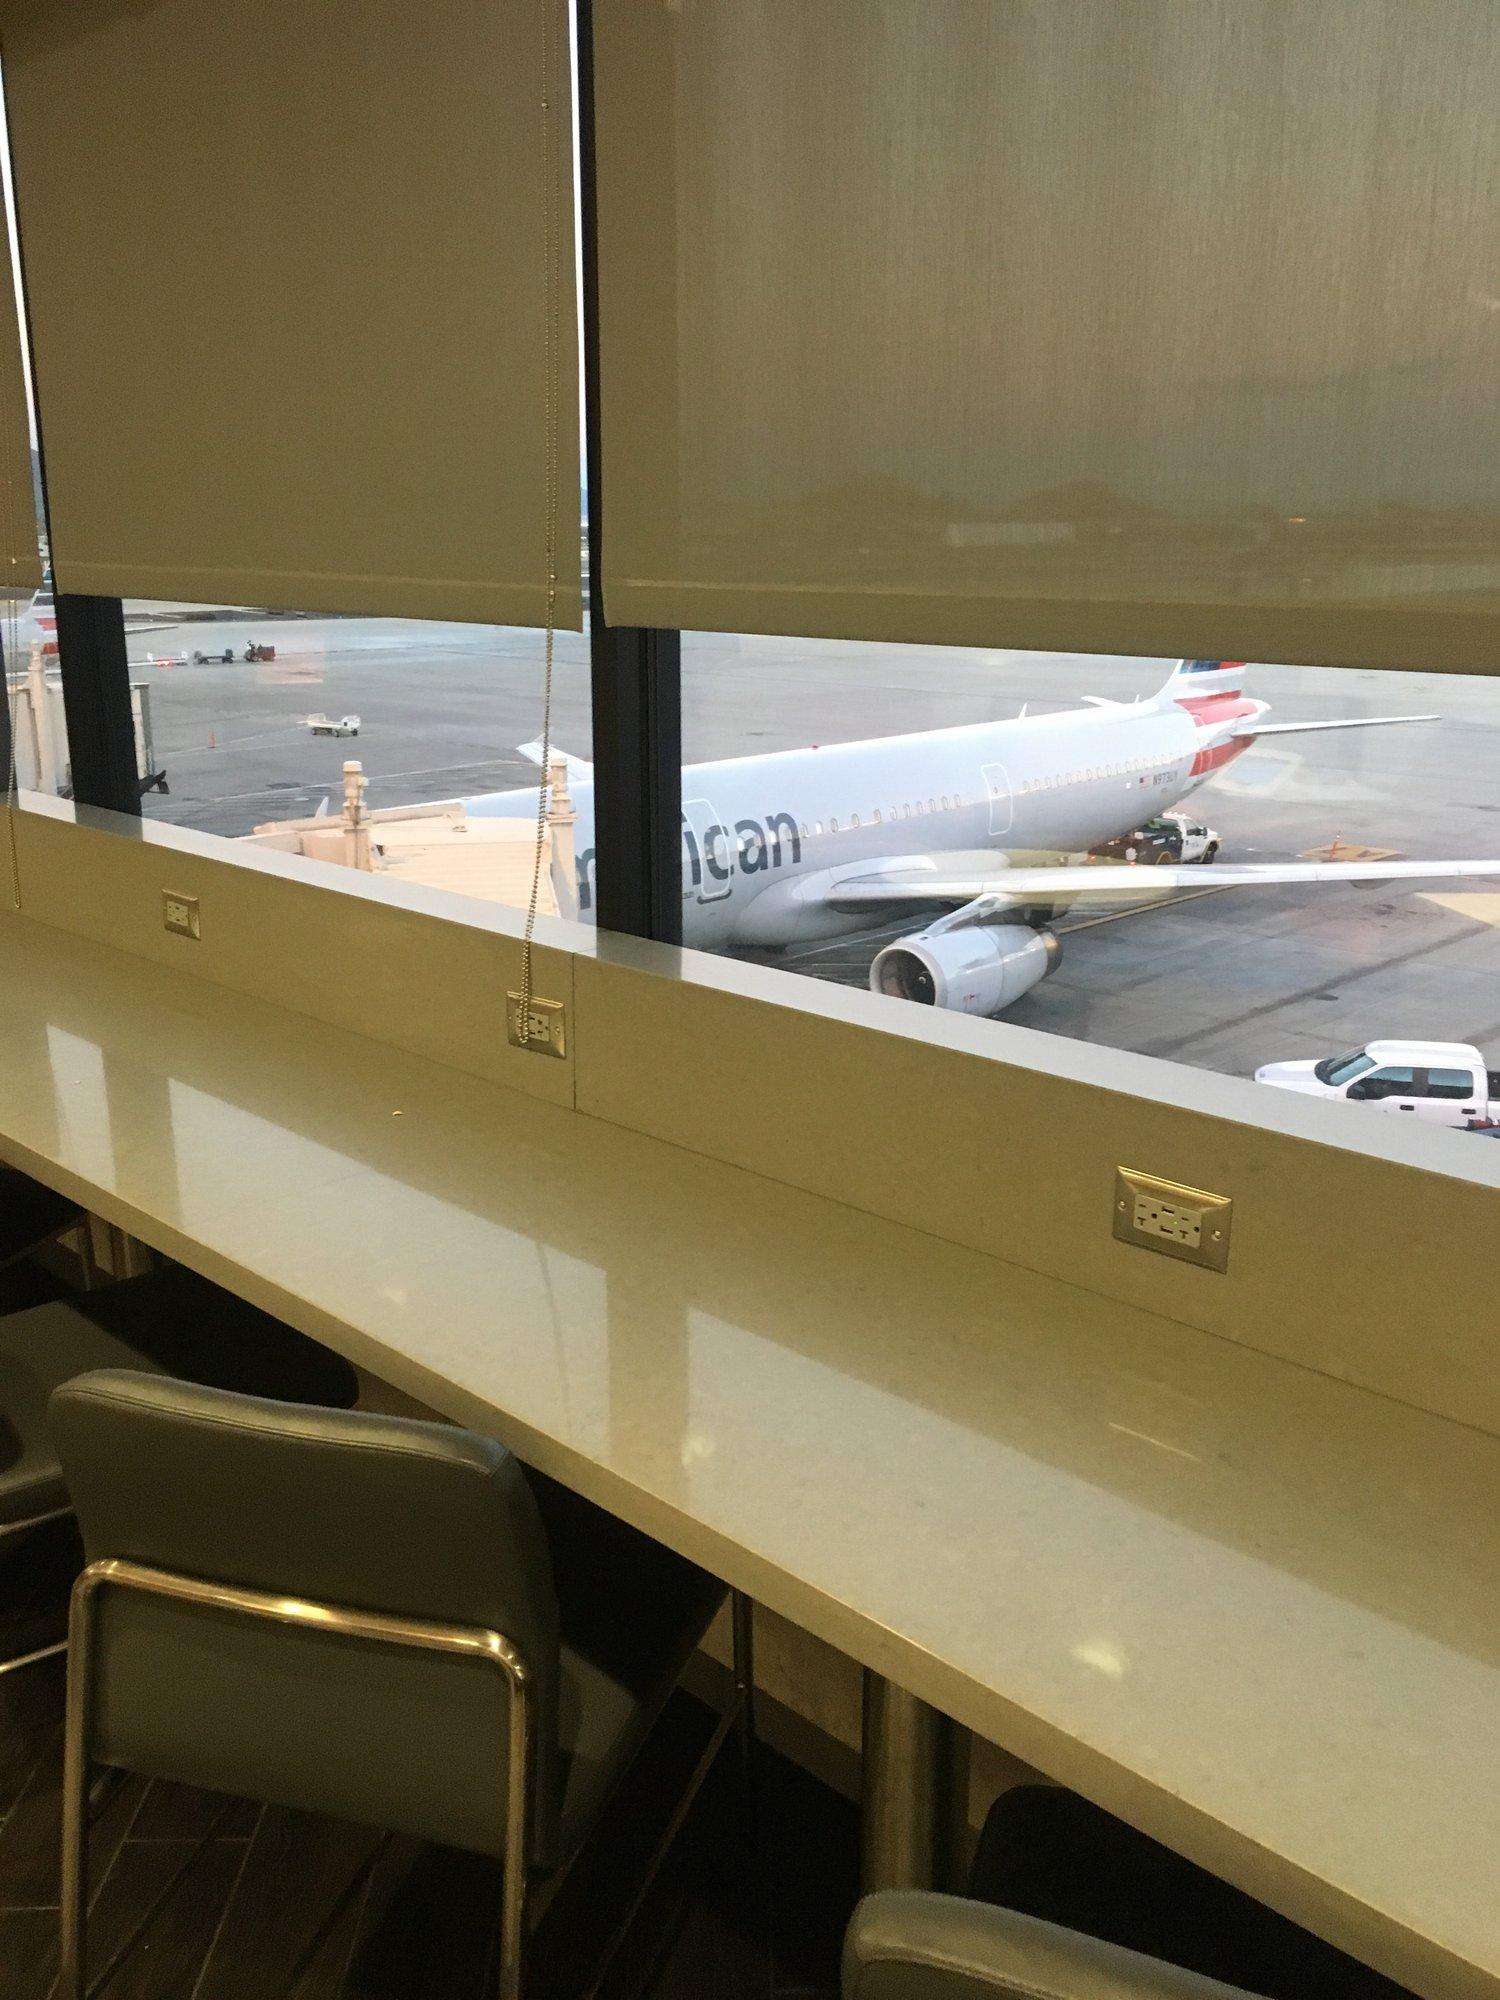 American Airlines Admirals Club (Gate A7) image 14 of 25